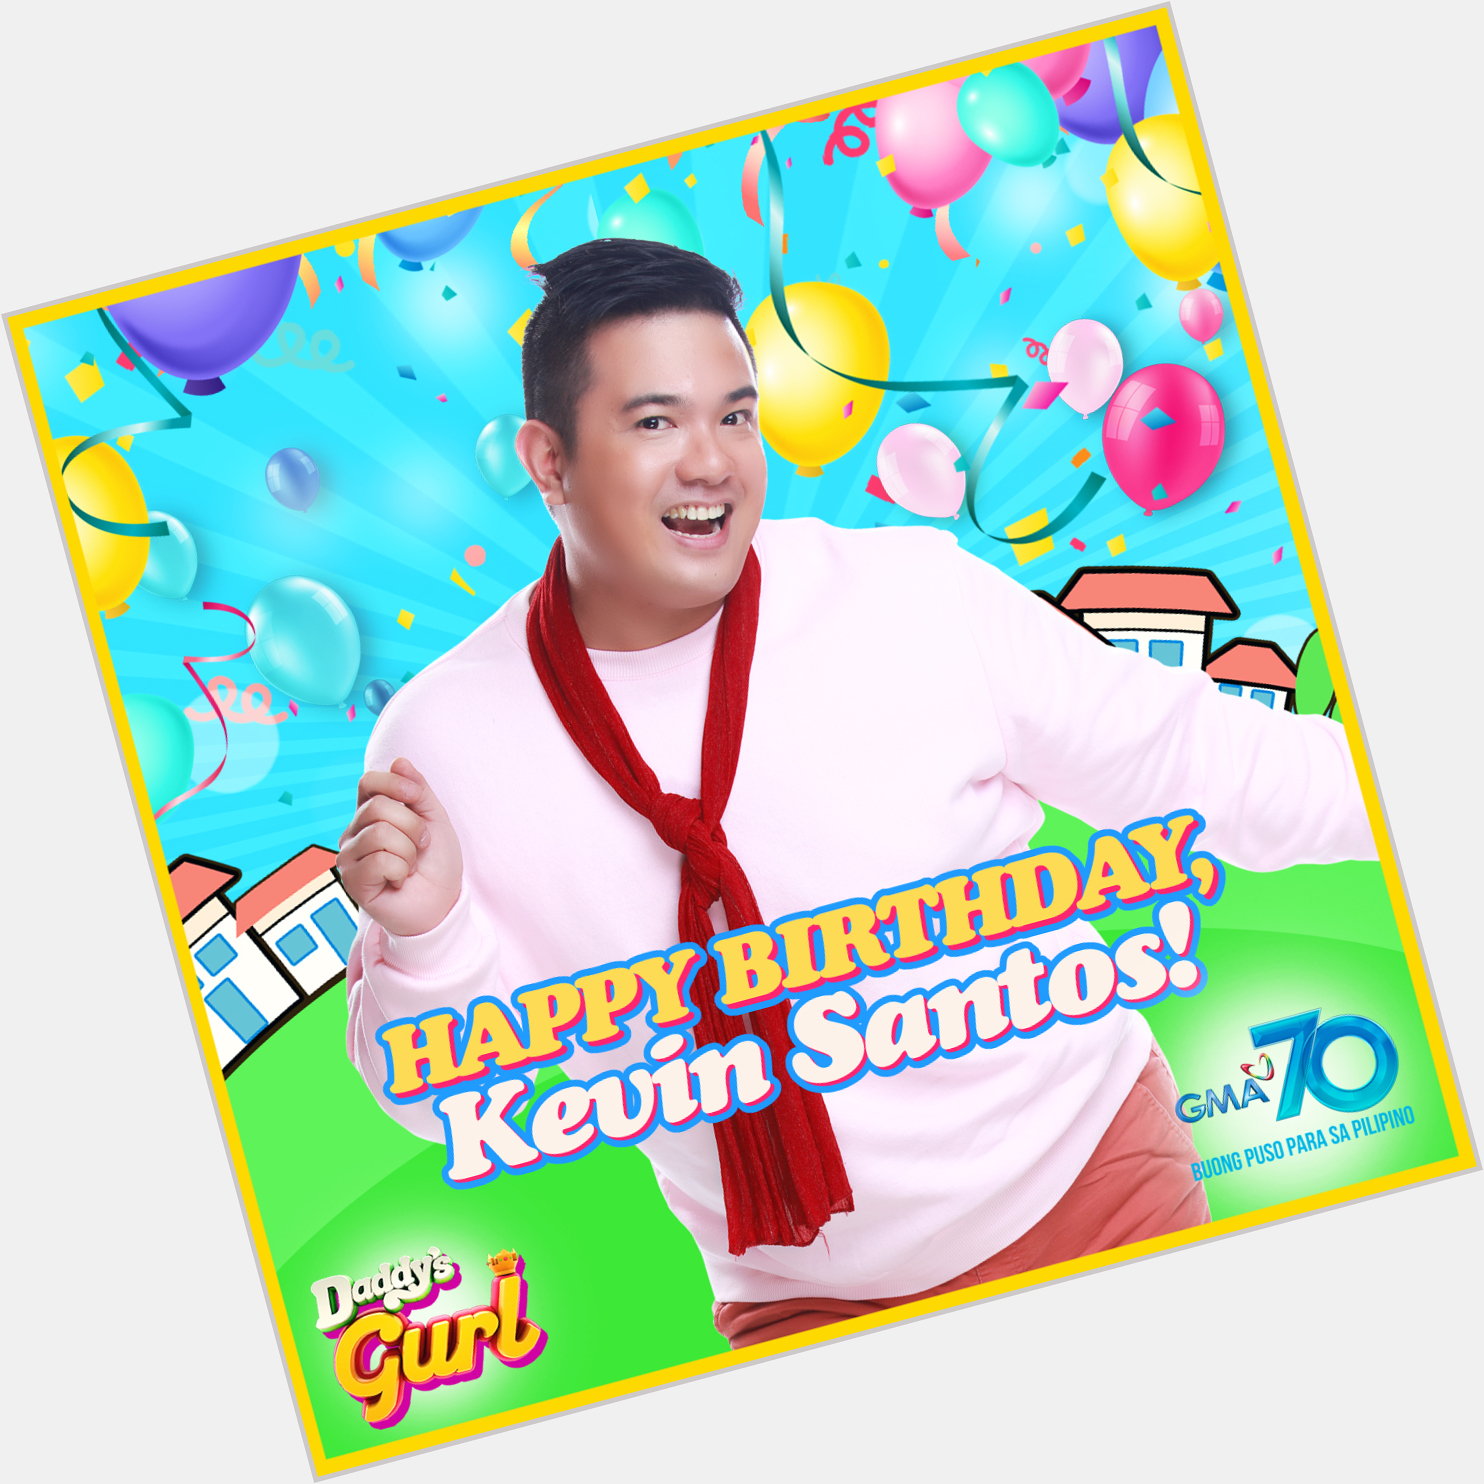 Happy birthday, Kevin Santos! Your family wishes you all the best! 